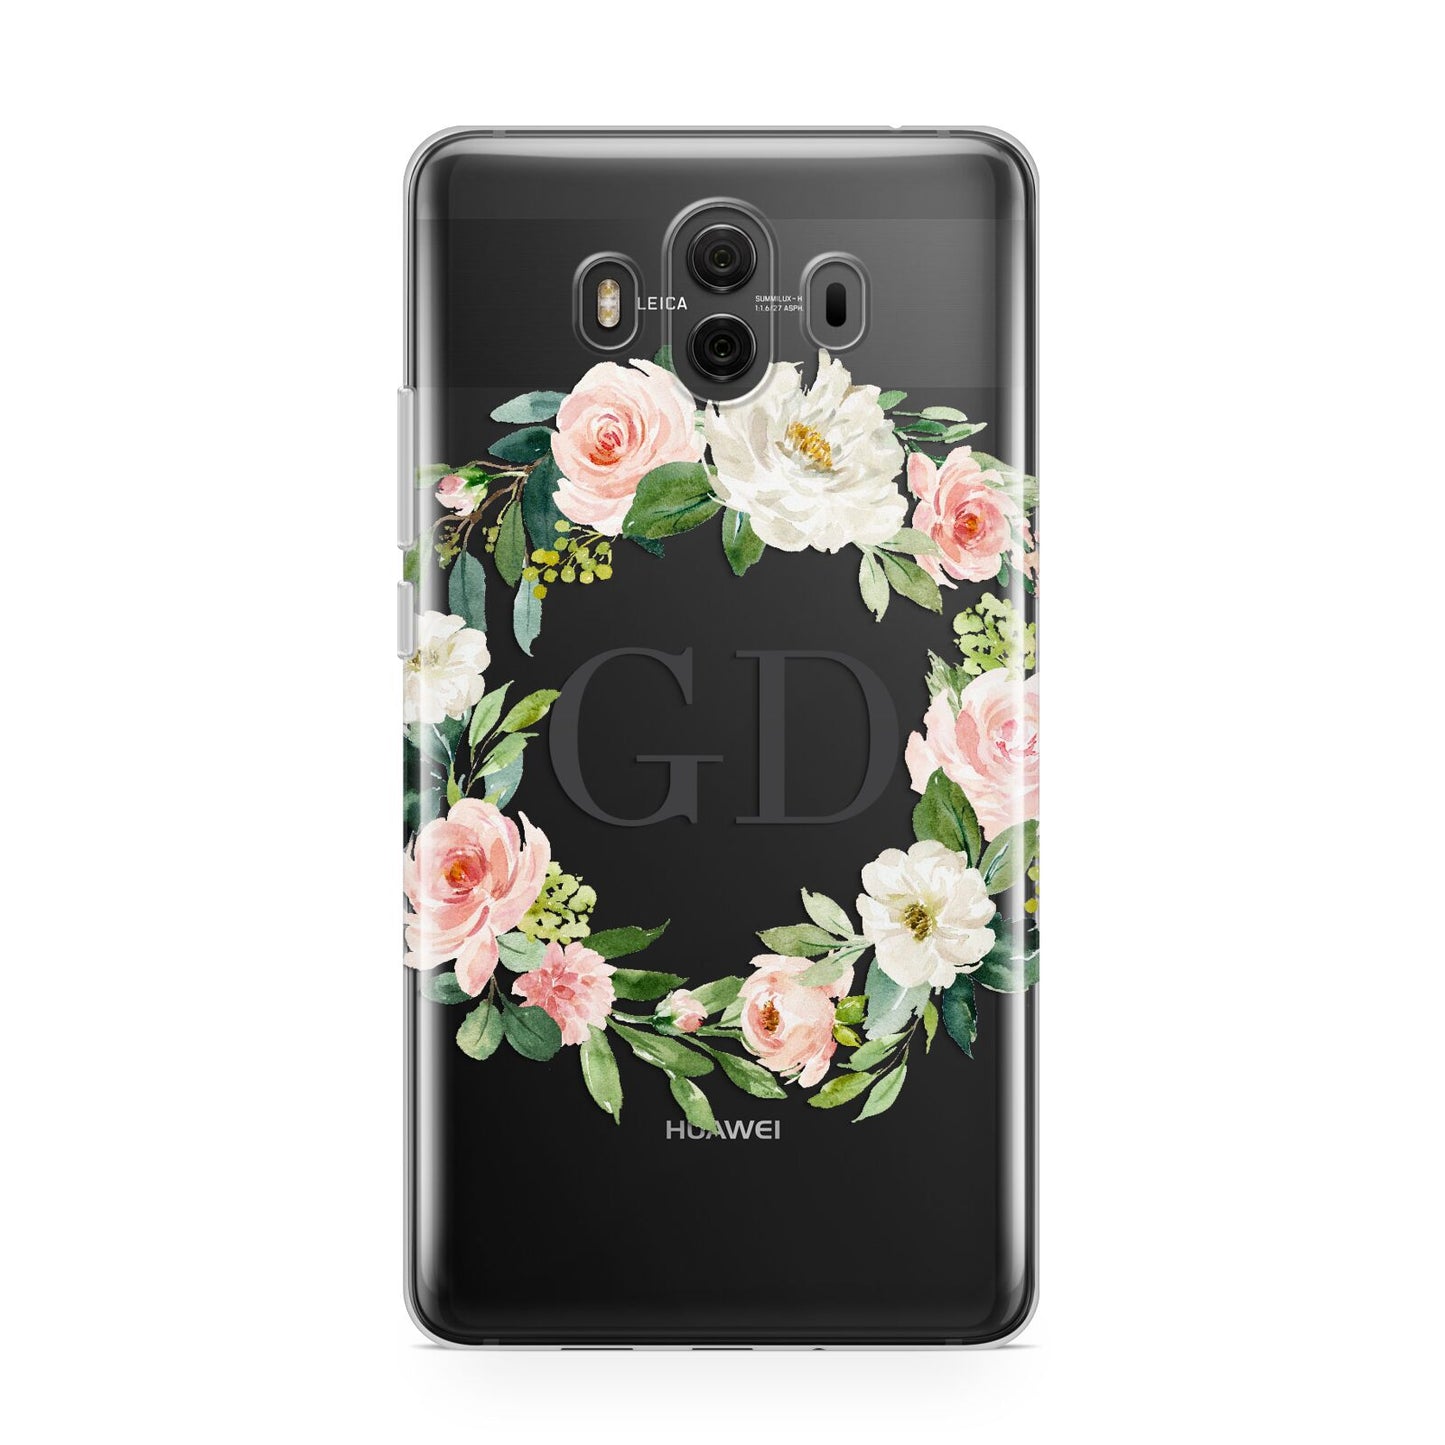 Personalised floral wreath Huawei Mate 10 Protective Phone Case